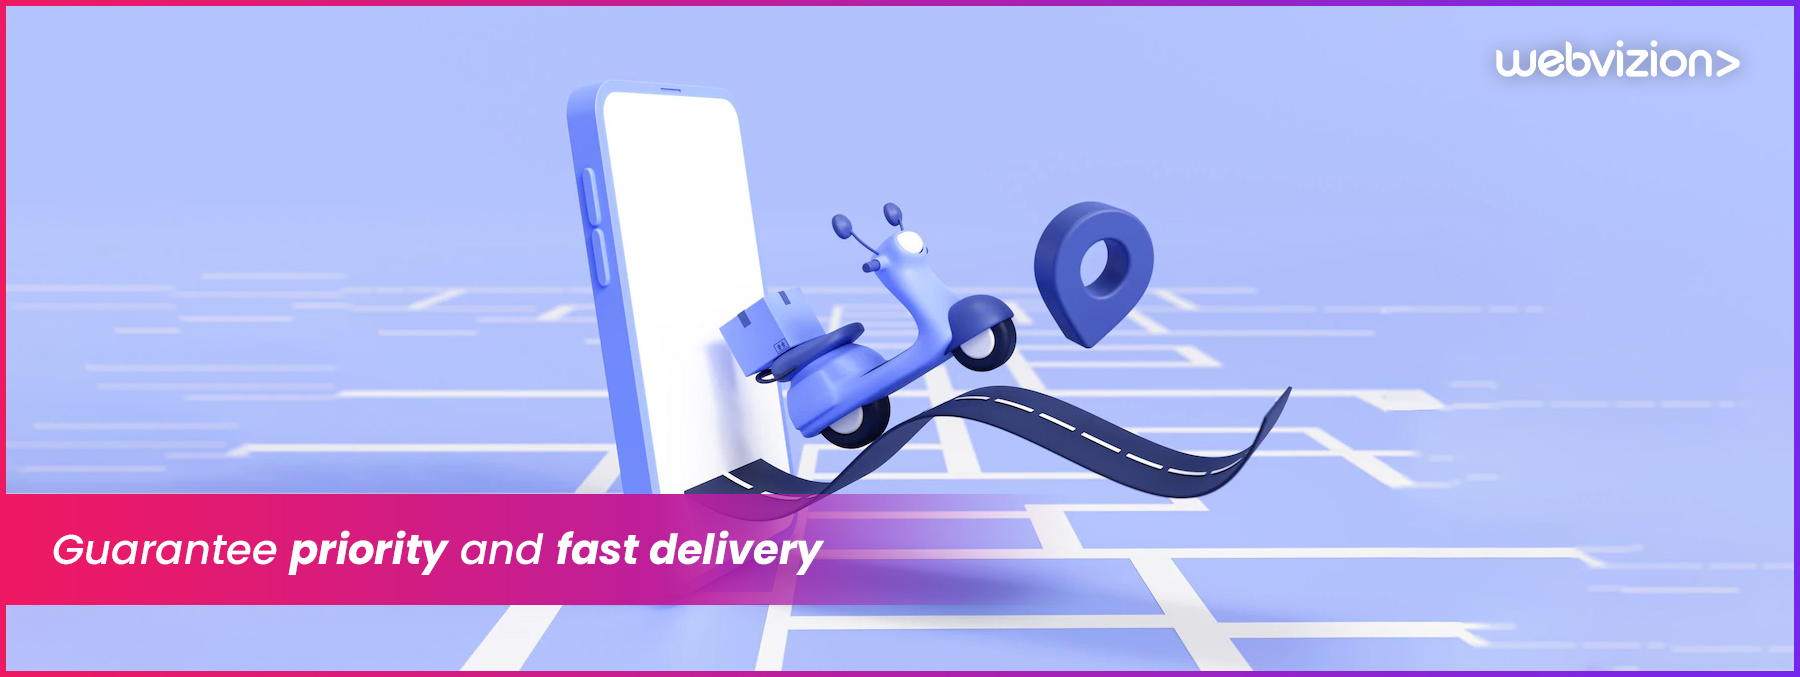 Guarantee-priority-and-fast-delivery-WebvizionGlobal